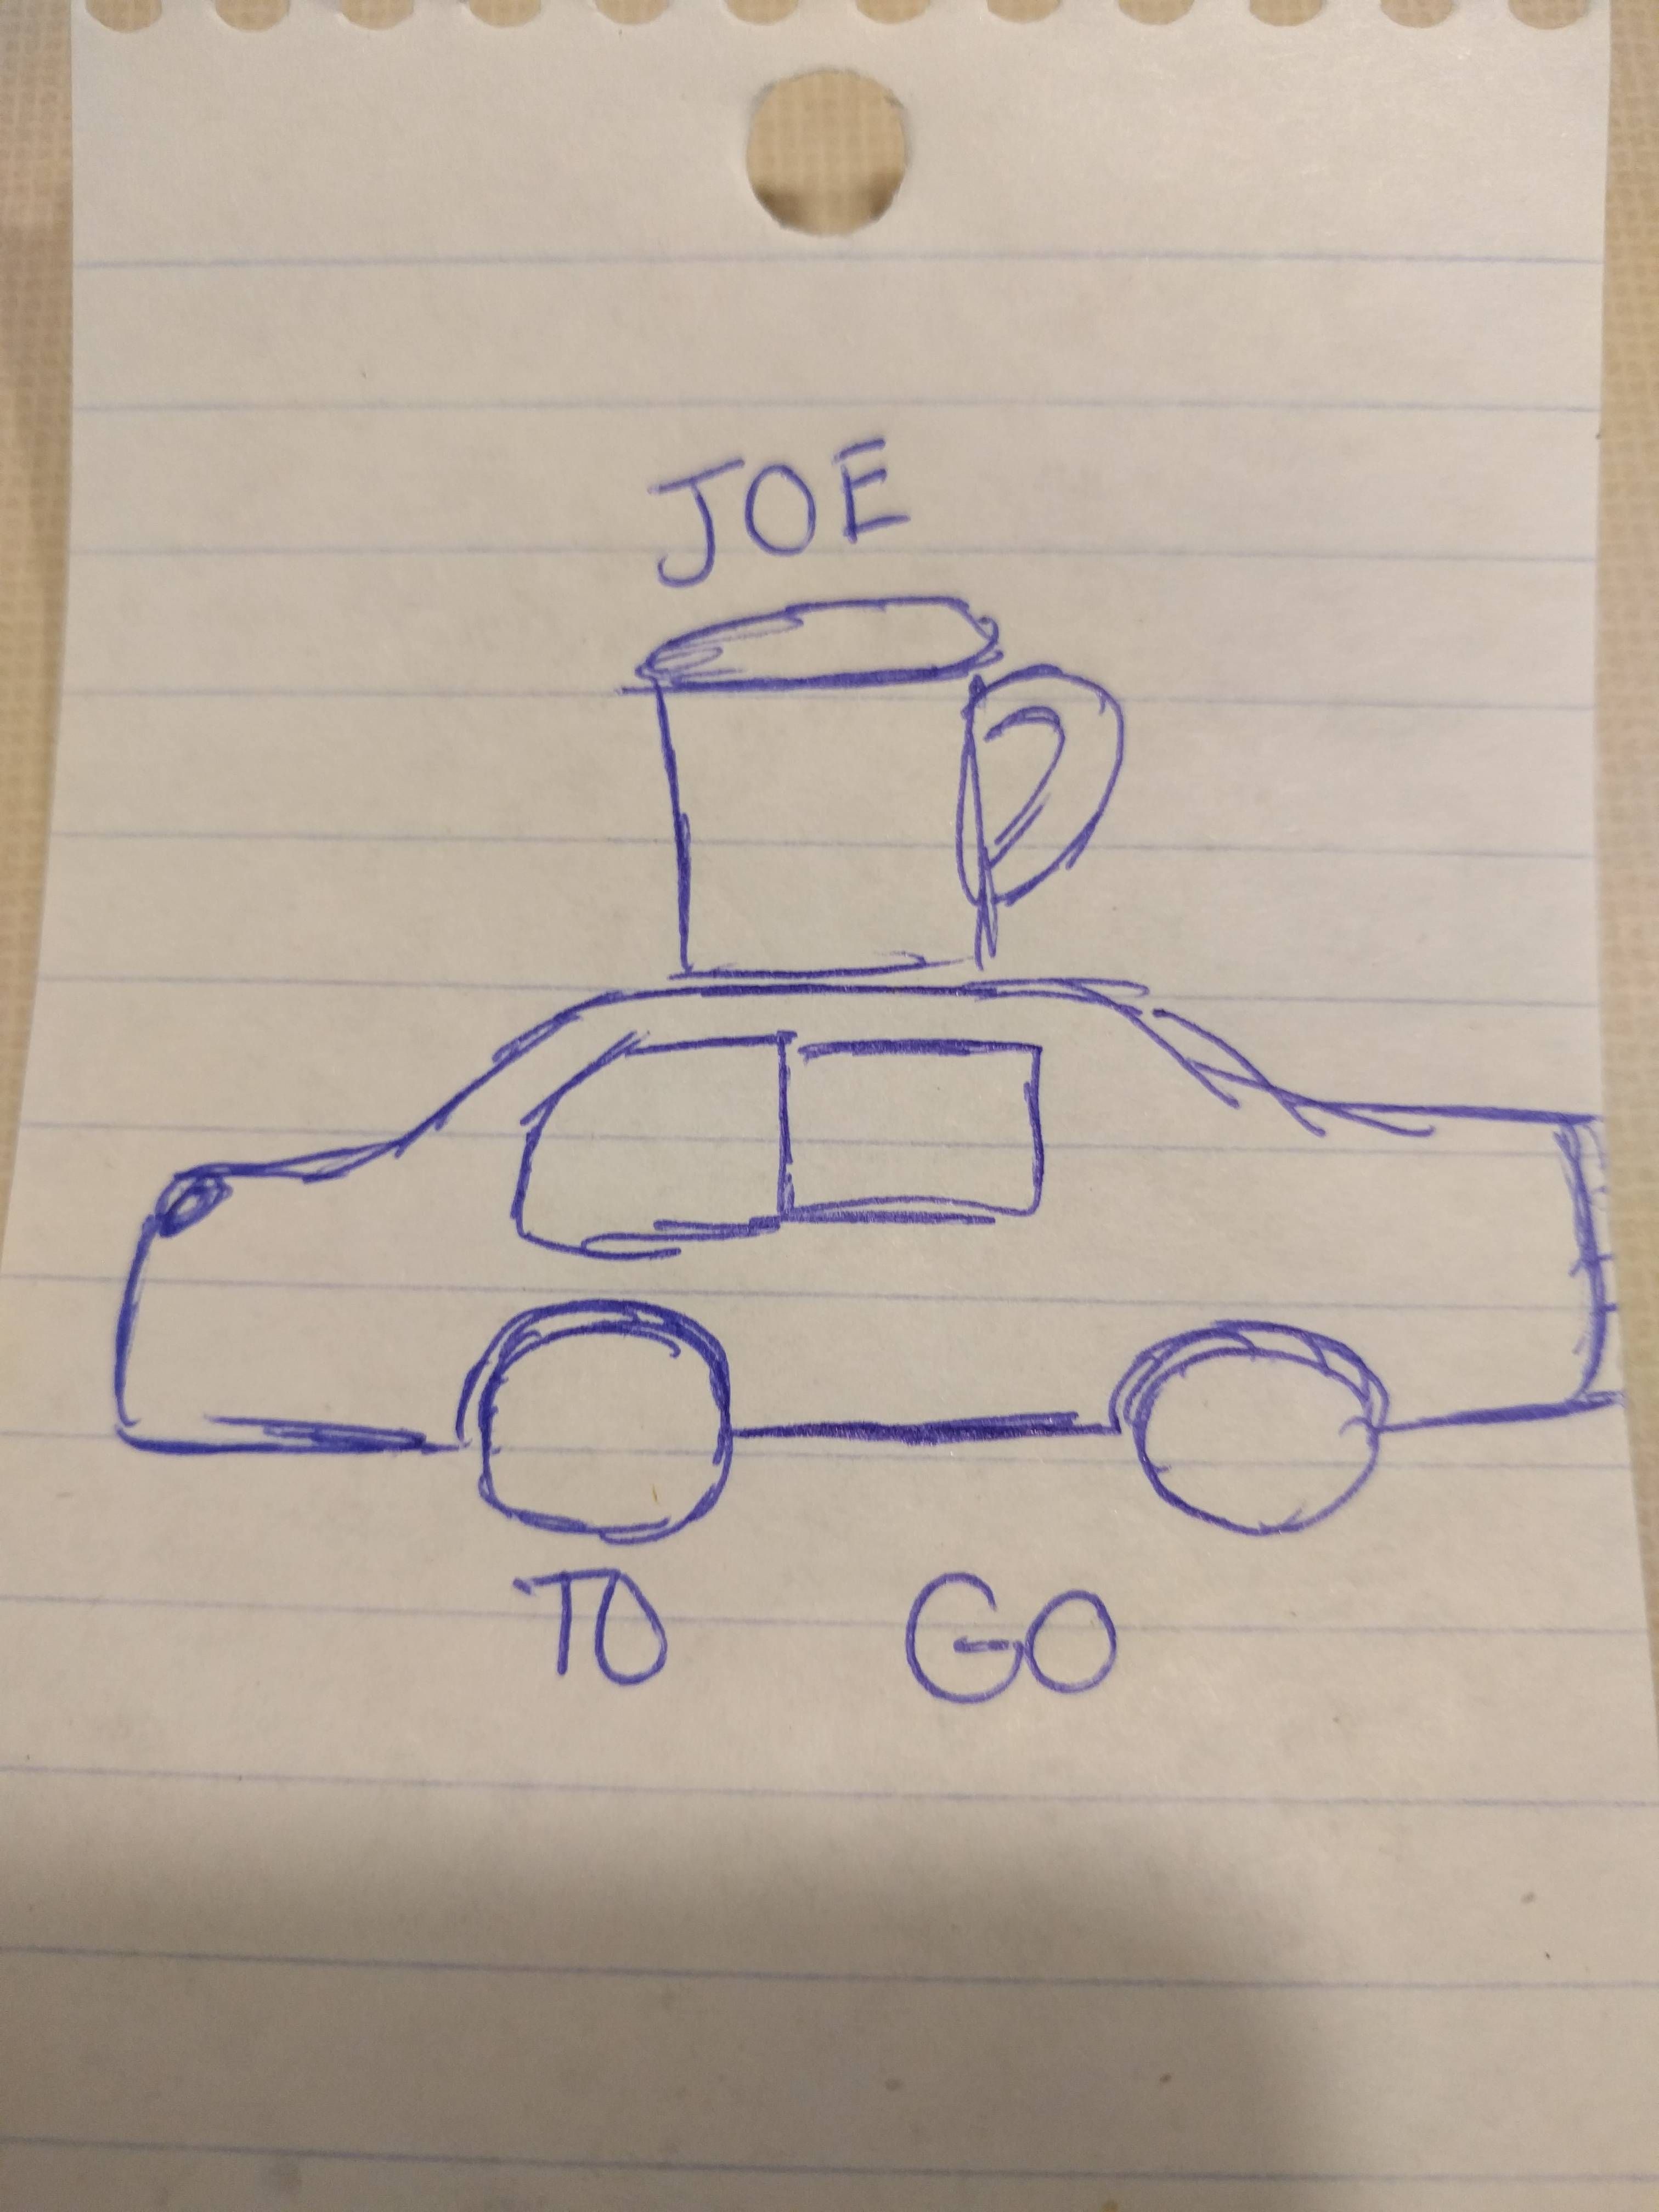 I have a client that is looking for a new logo and my daughter asked if she could help. I told her to create something that incorporates coffee and cars.